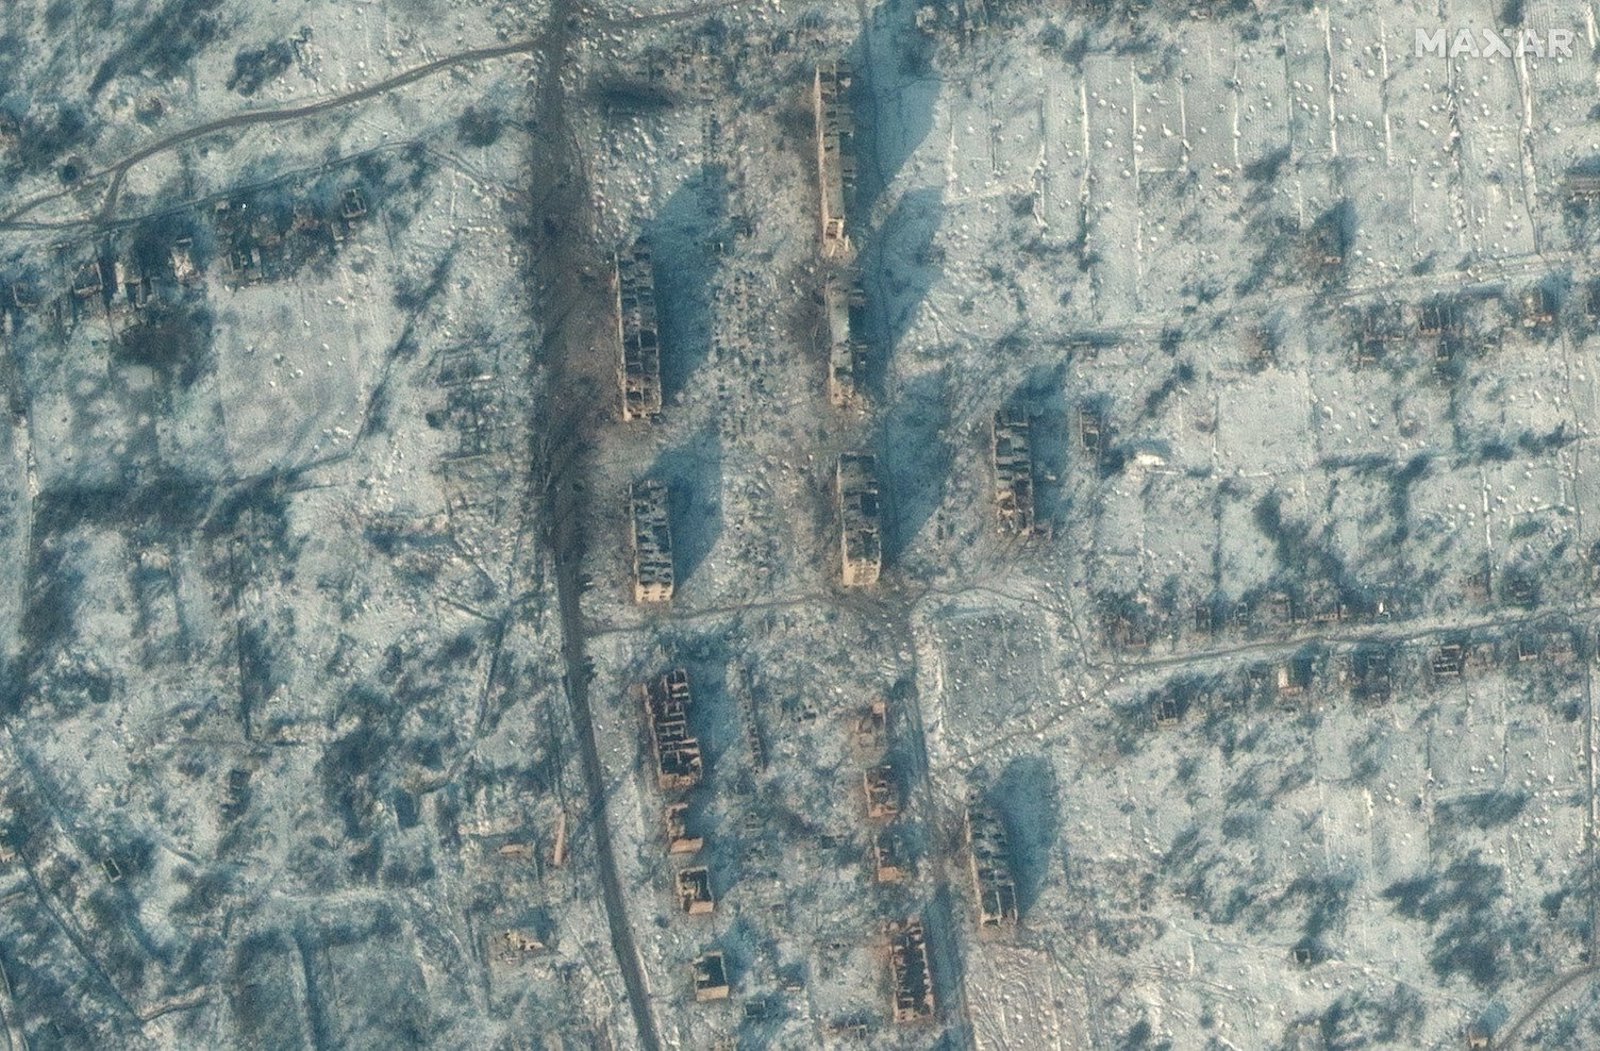 Satellite imagery shows destroyed apartment buildings and homes in Soledar on January 3, 2022.